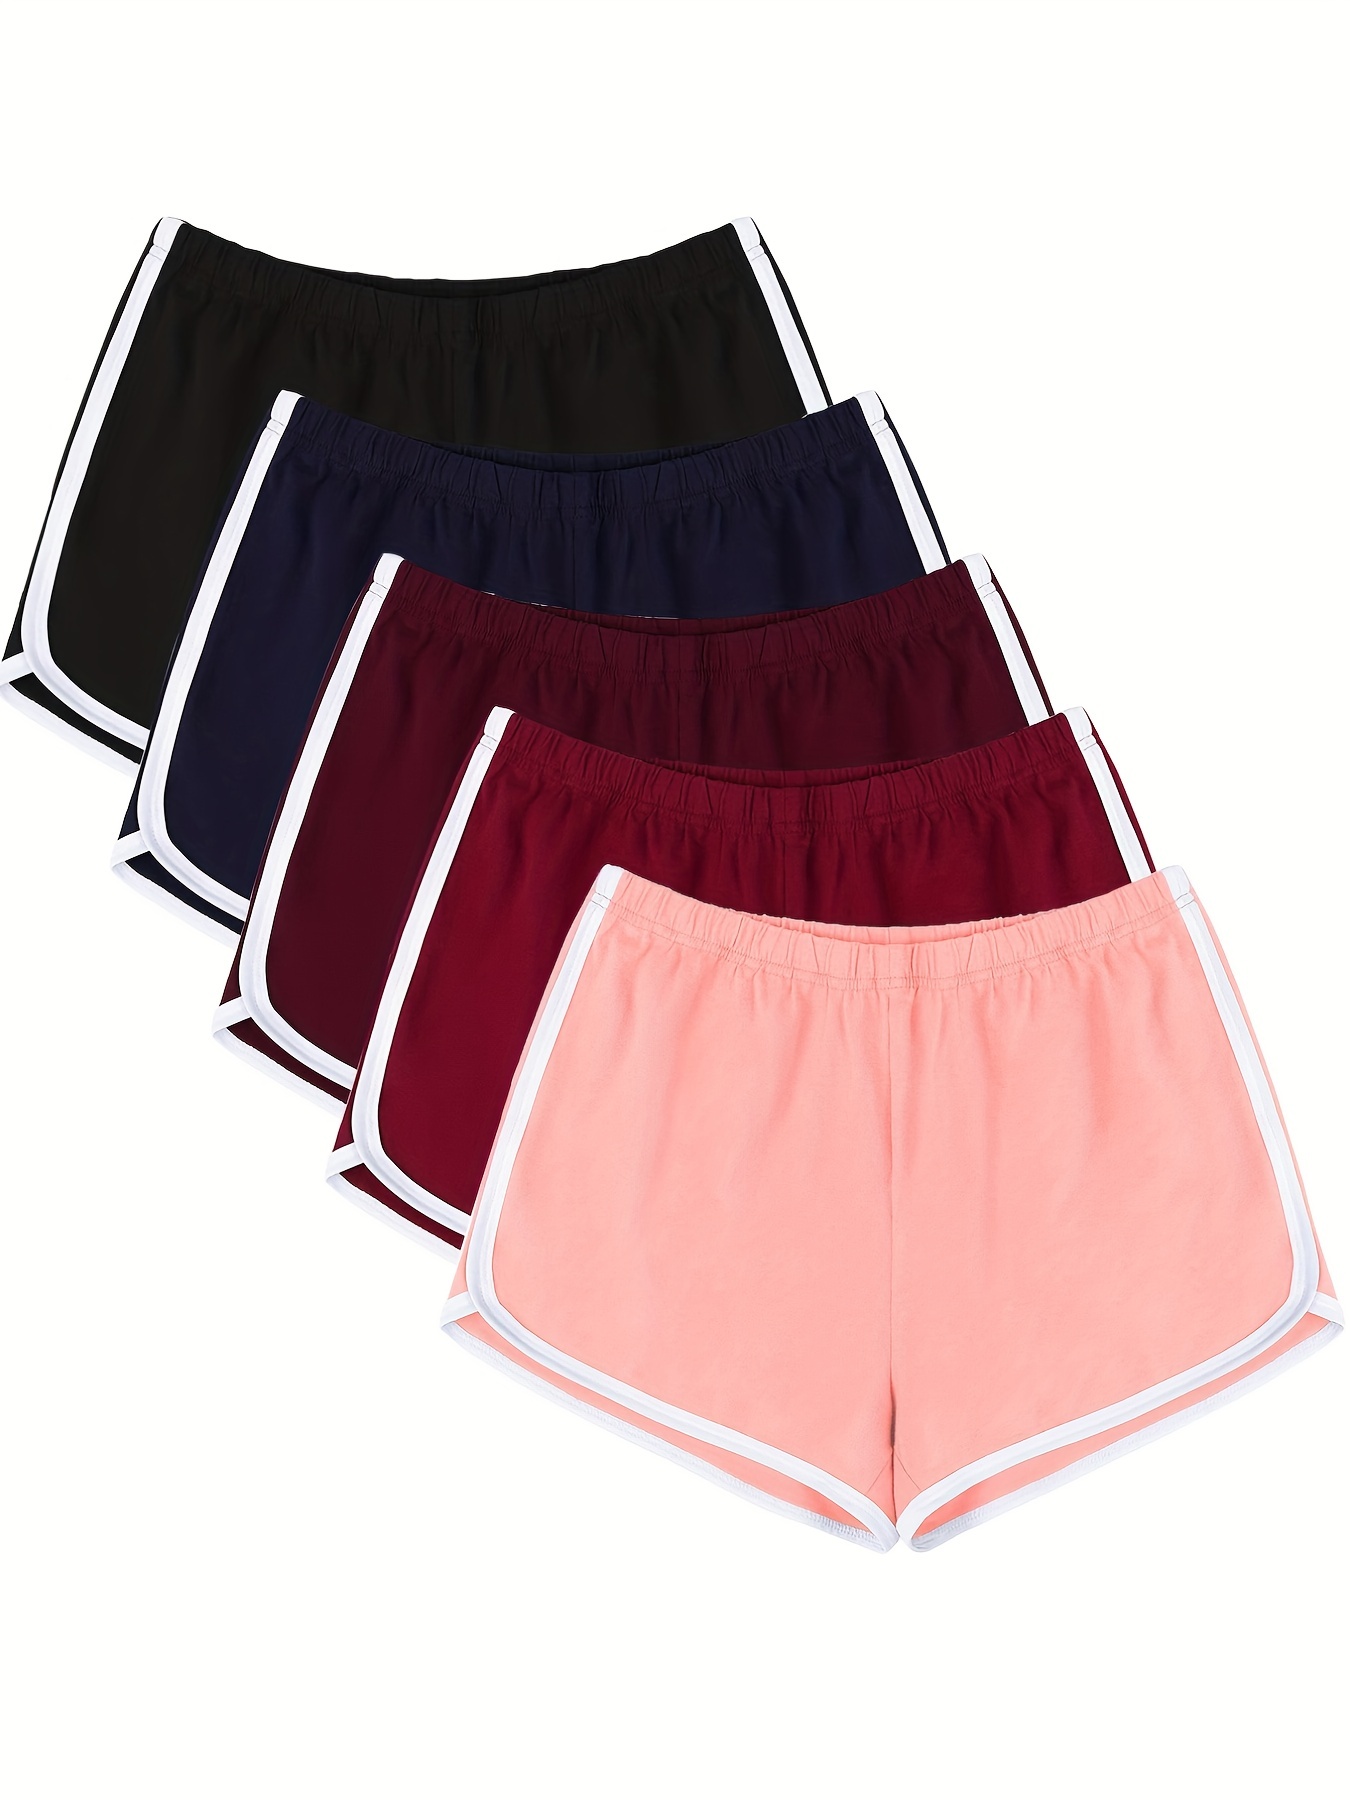 5 pcs Women's Yoga Shorts - Comfortable and Stretchy Sports Shorts for  Summer Activewear